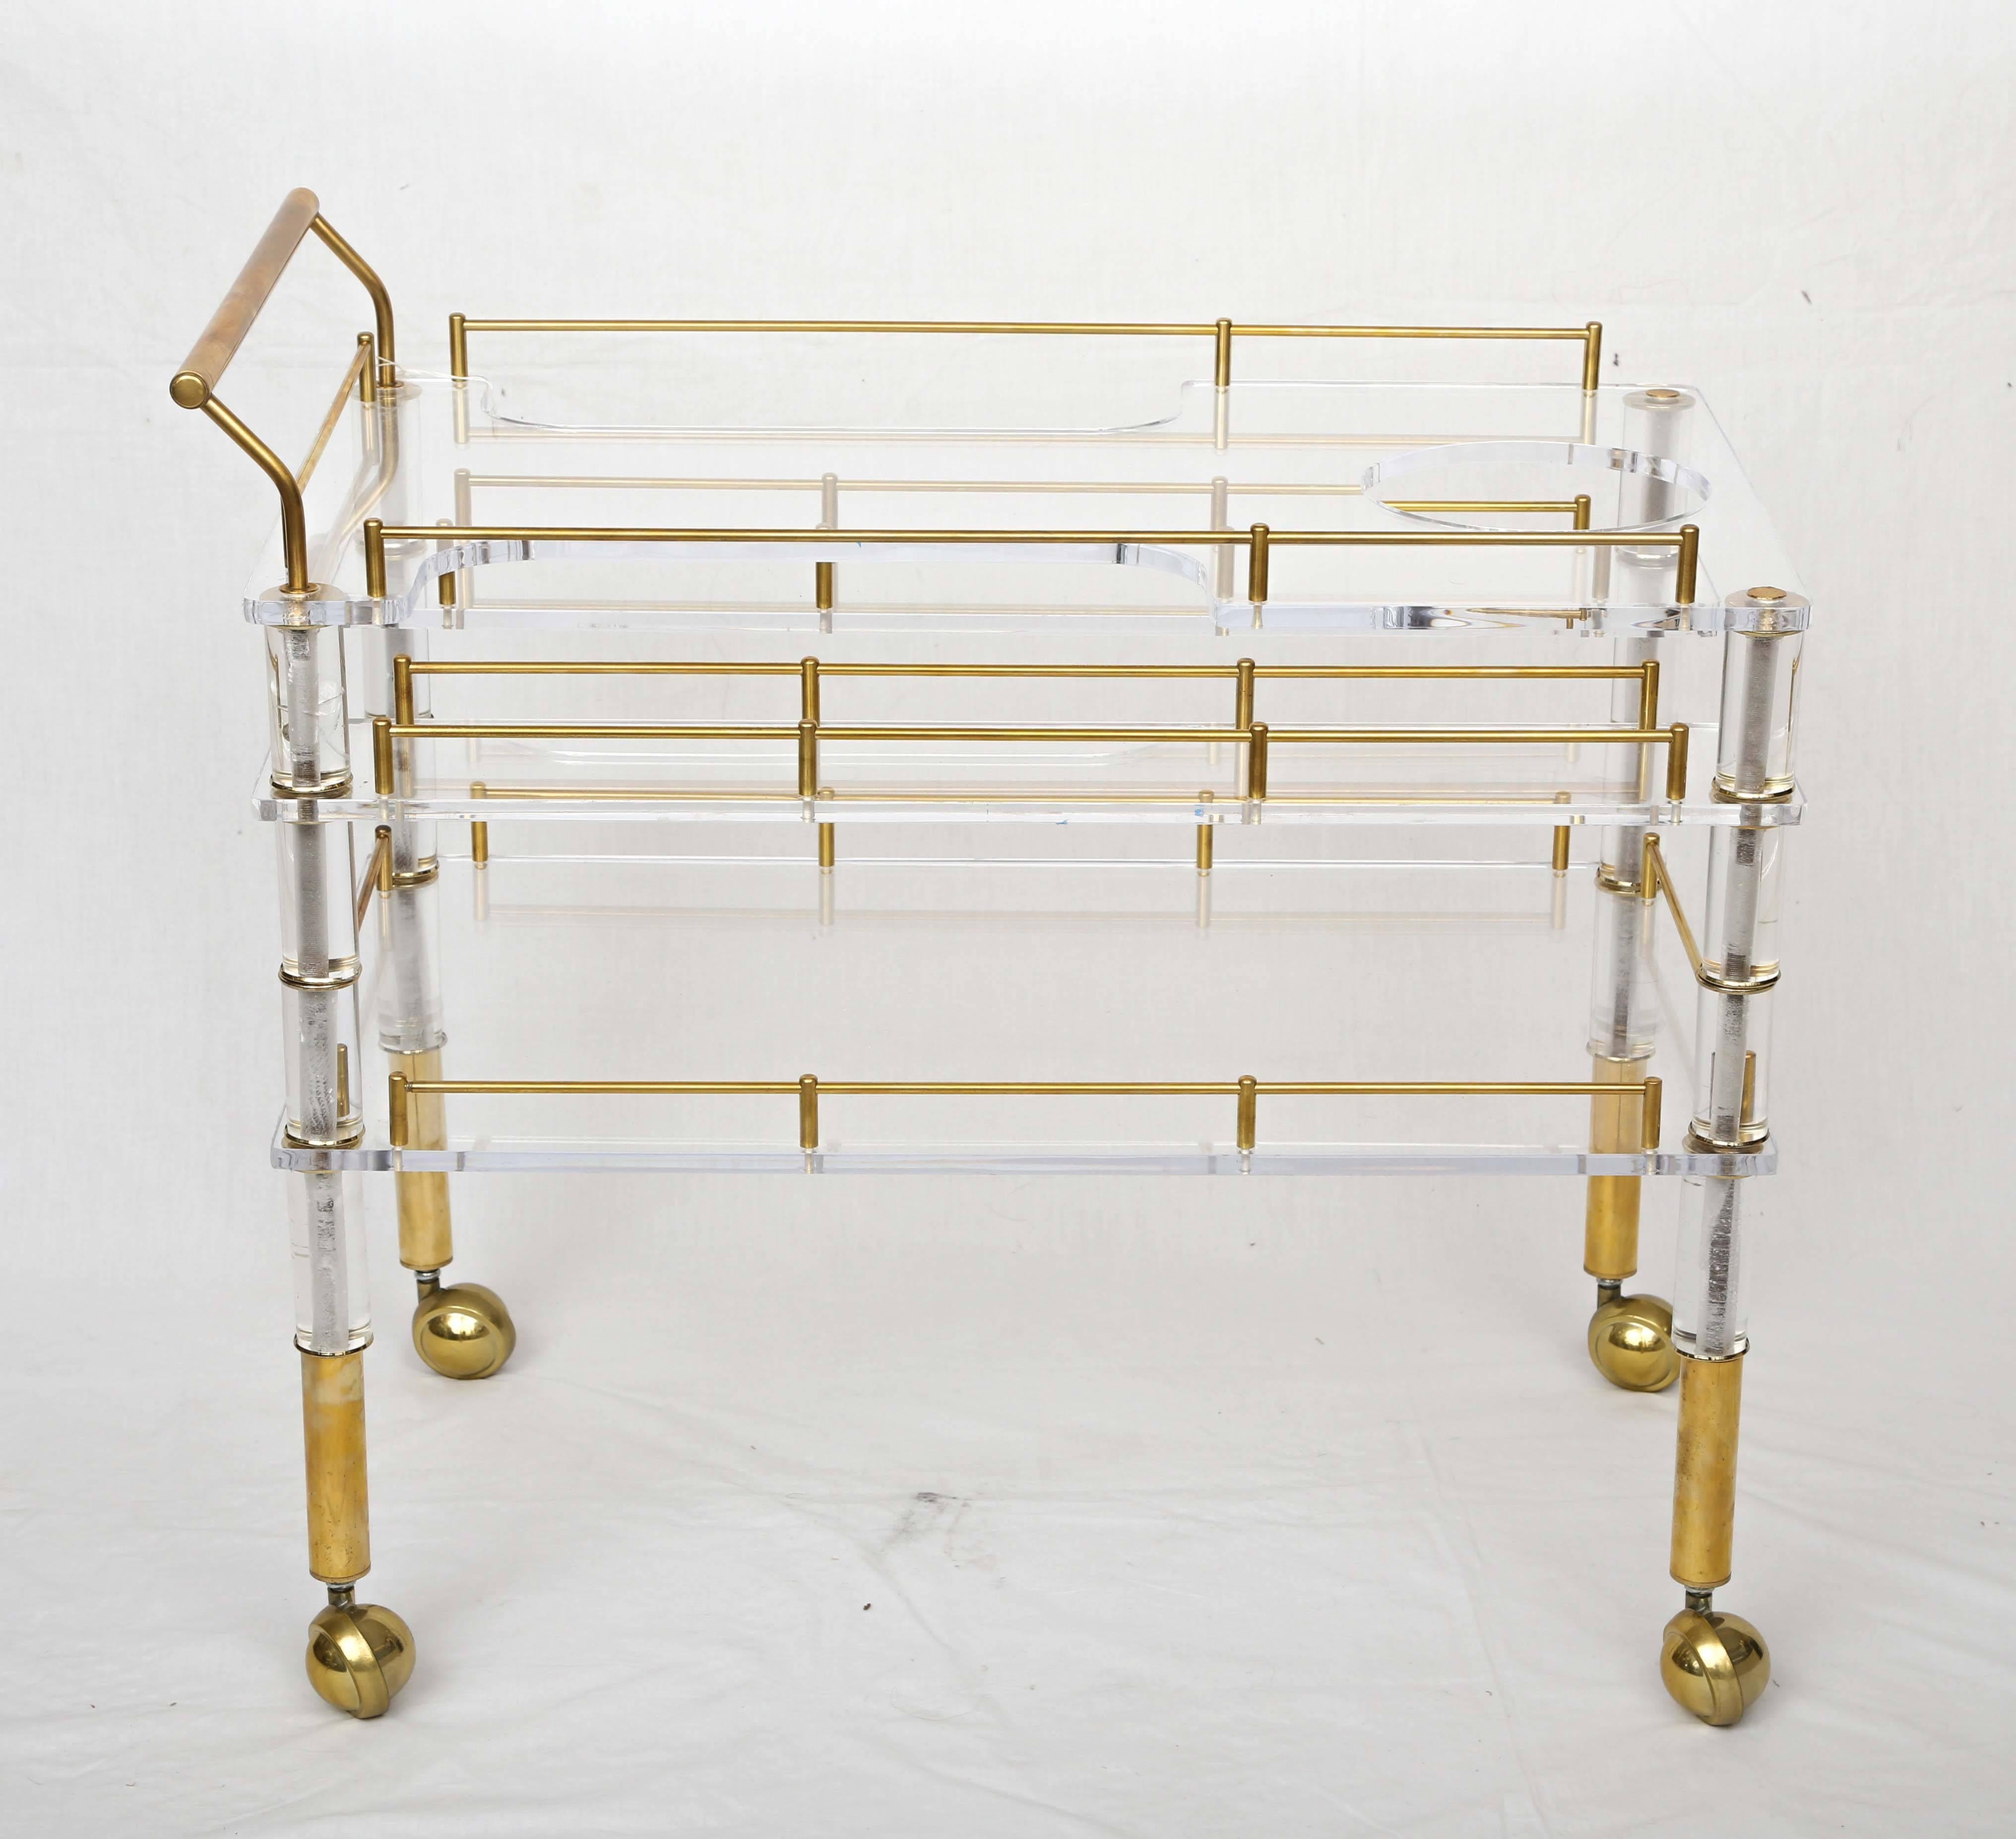 Offered is a beautiful crafted Lucite and brass bar cart on casters in the style of Charles Hollis Jones. It has two levels and the top can hold an ice bucket as well as drinking glasses on each side.
Note the brass details all around the cart.